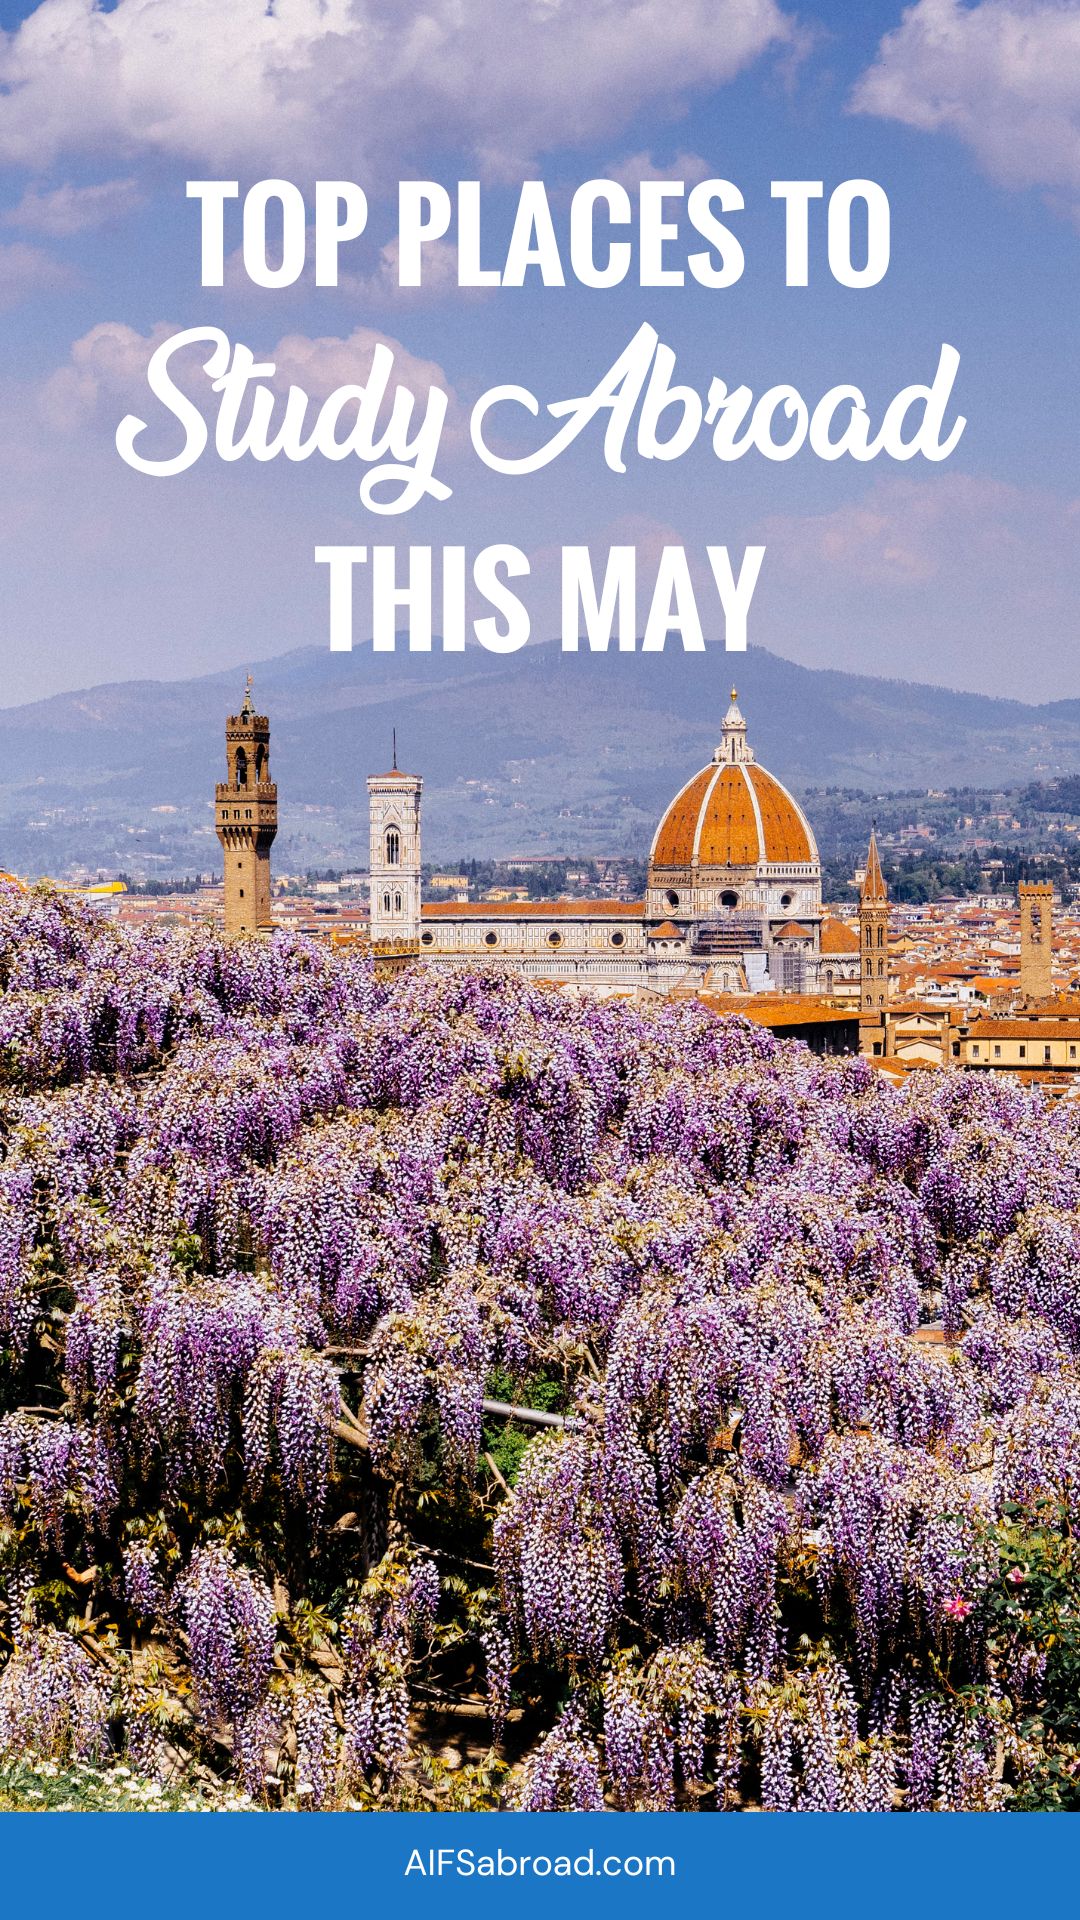 Pin image: Top Places to Study Abroad this May Term - Florence, Italy during Springtime - AIFS Abroad